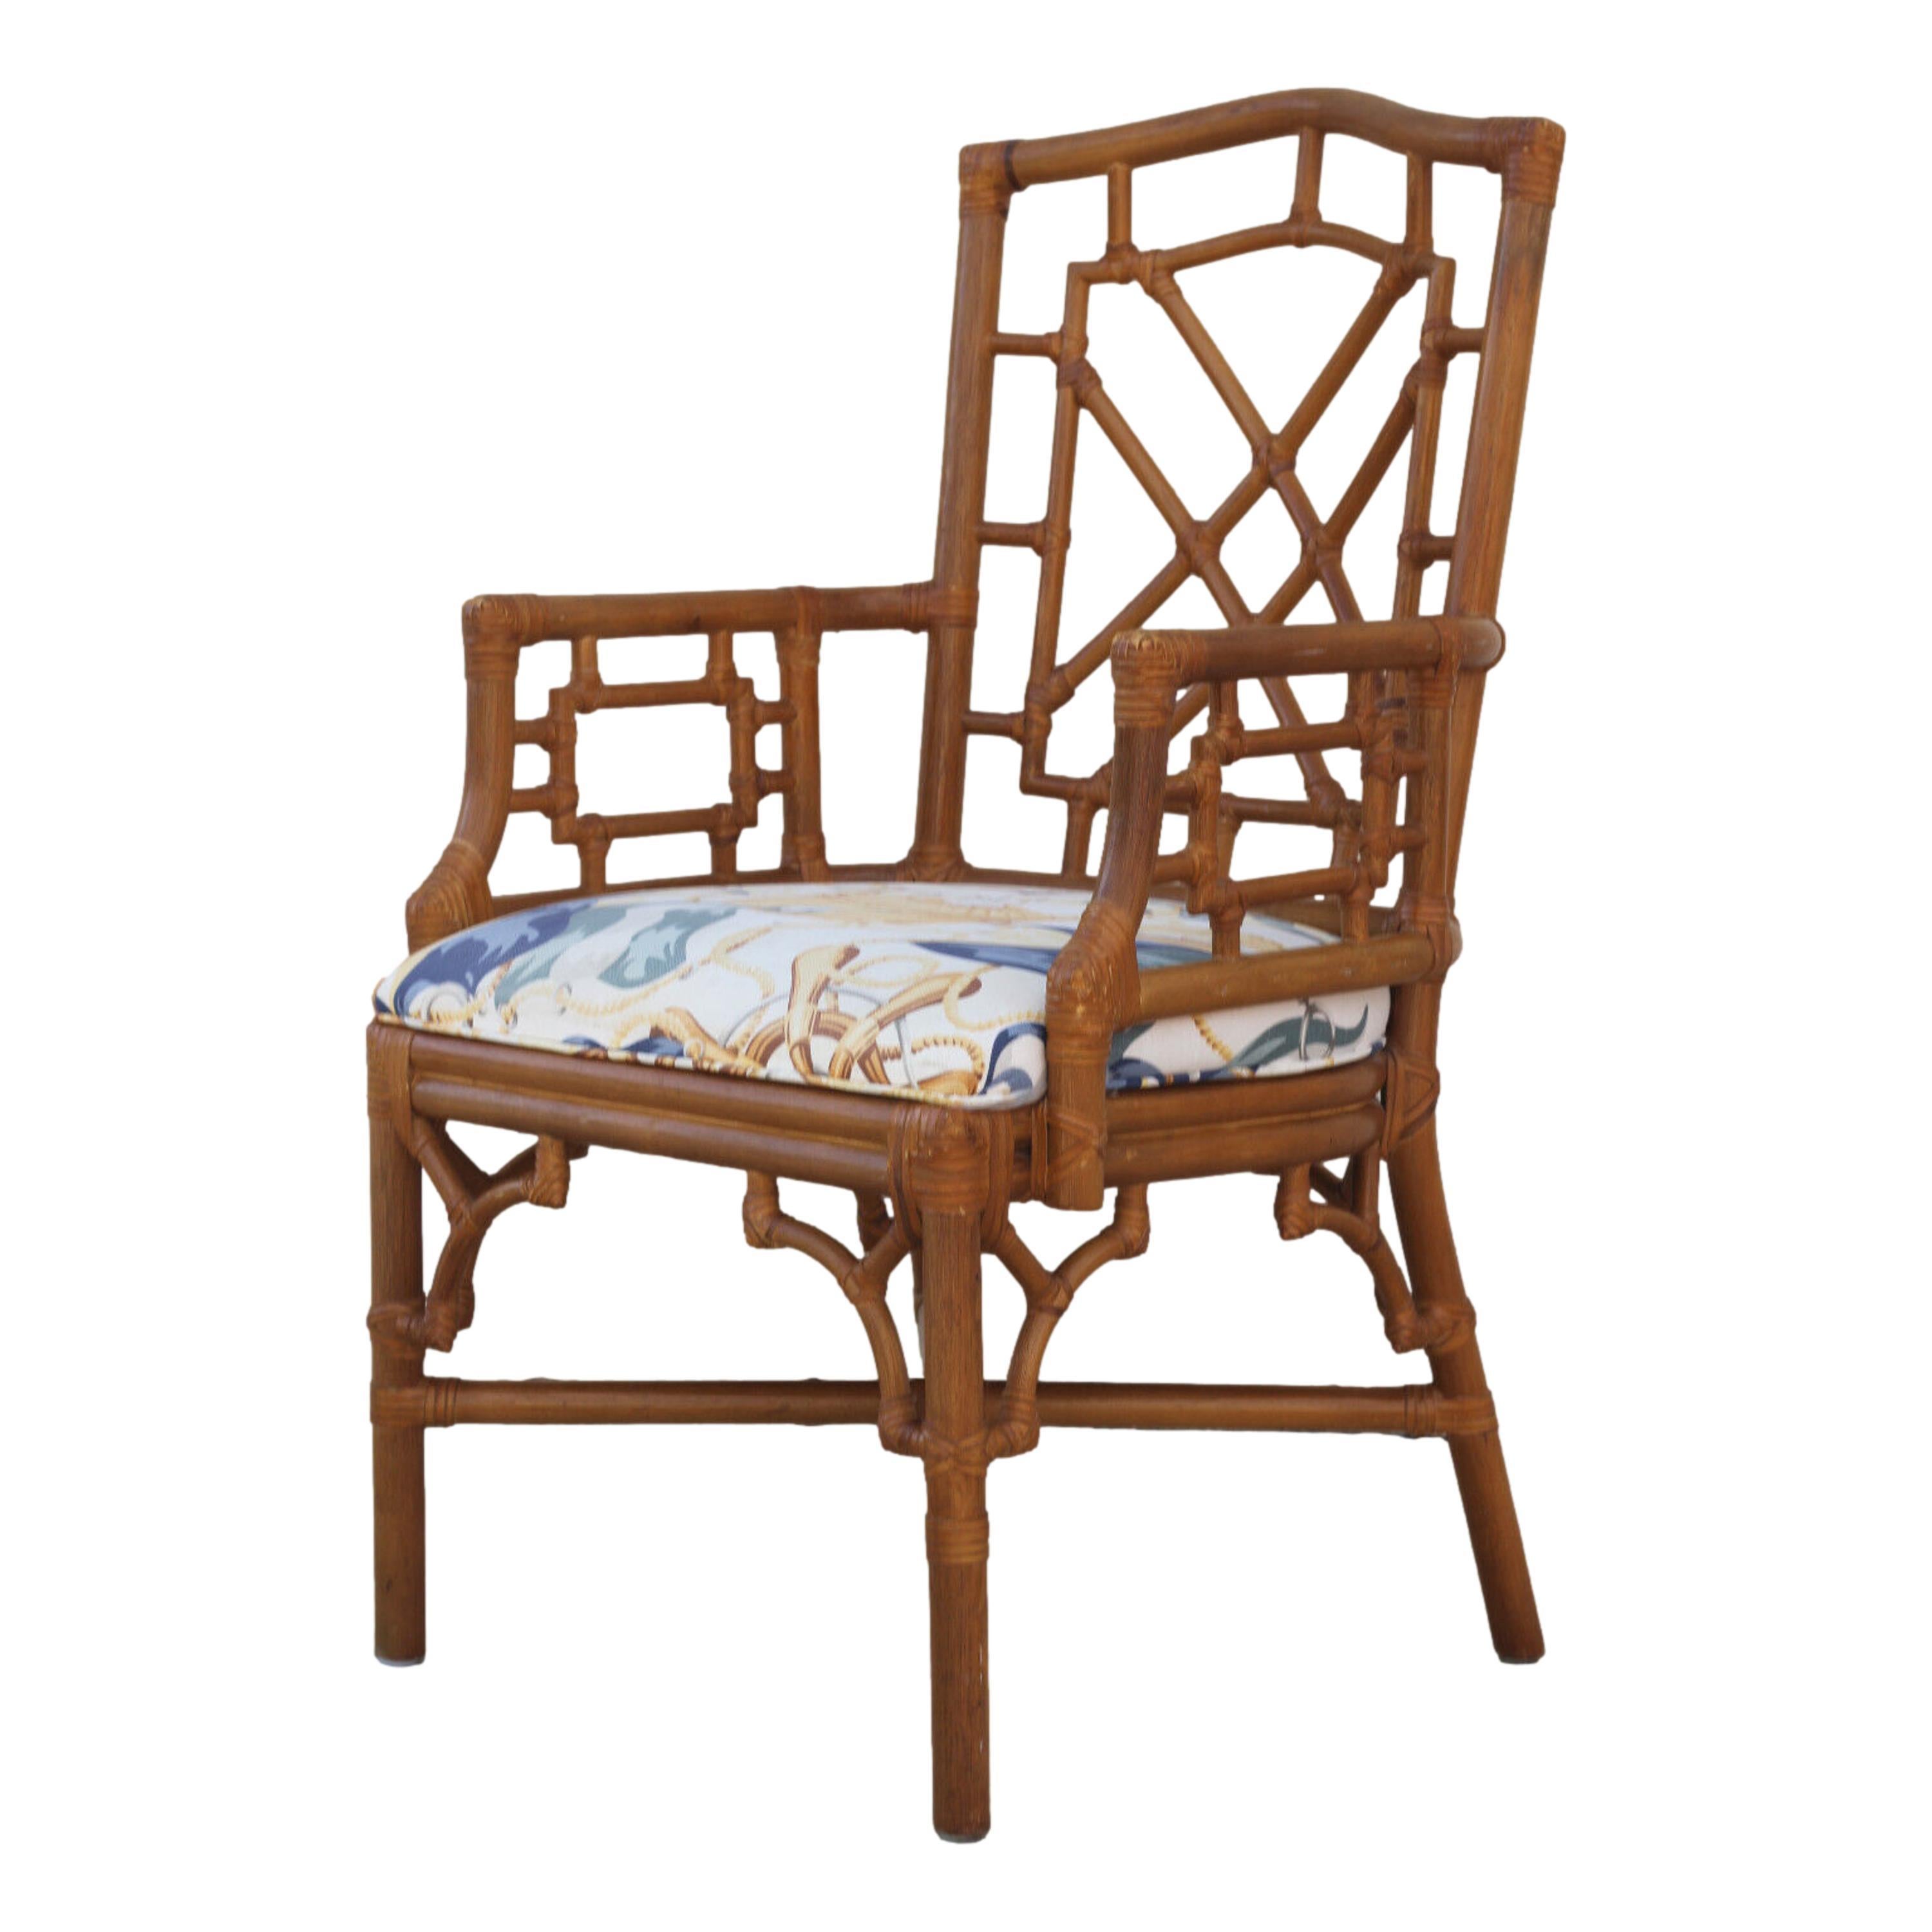 A lovely set of eight vintage rattan dining armchairs by Lexington. The Chinese Chippendale style chairs feature rattan frames with rattan fretwork on the chair backs, arm panels, and fretwork corners under the seats. Leather lacing is used on the